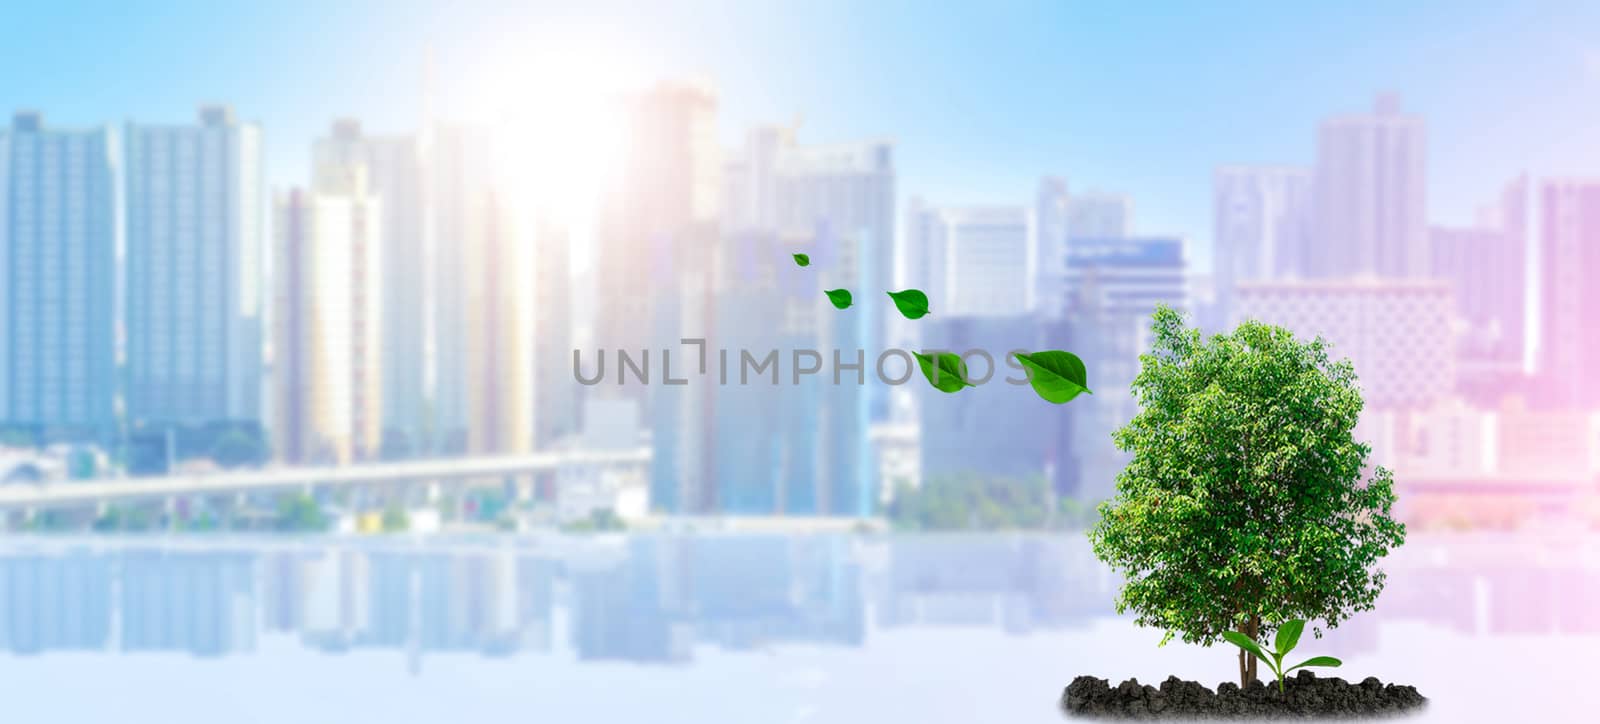 Ecology And planting trees in the city to Urban environment